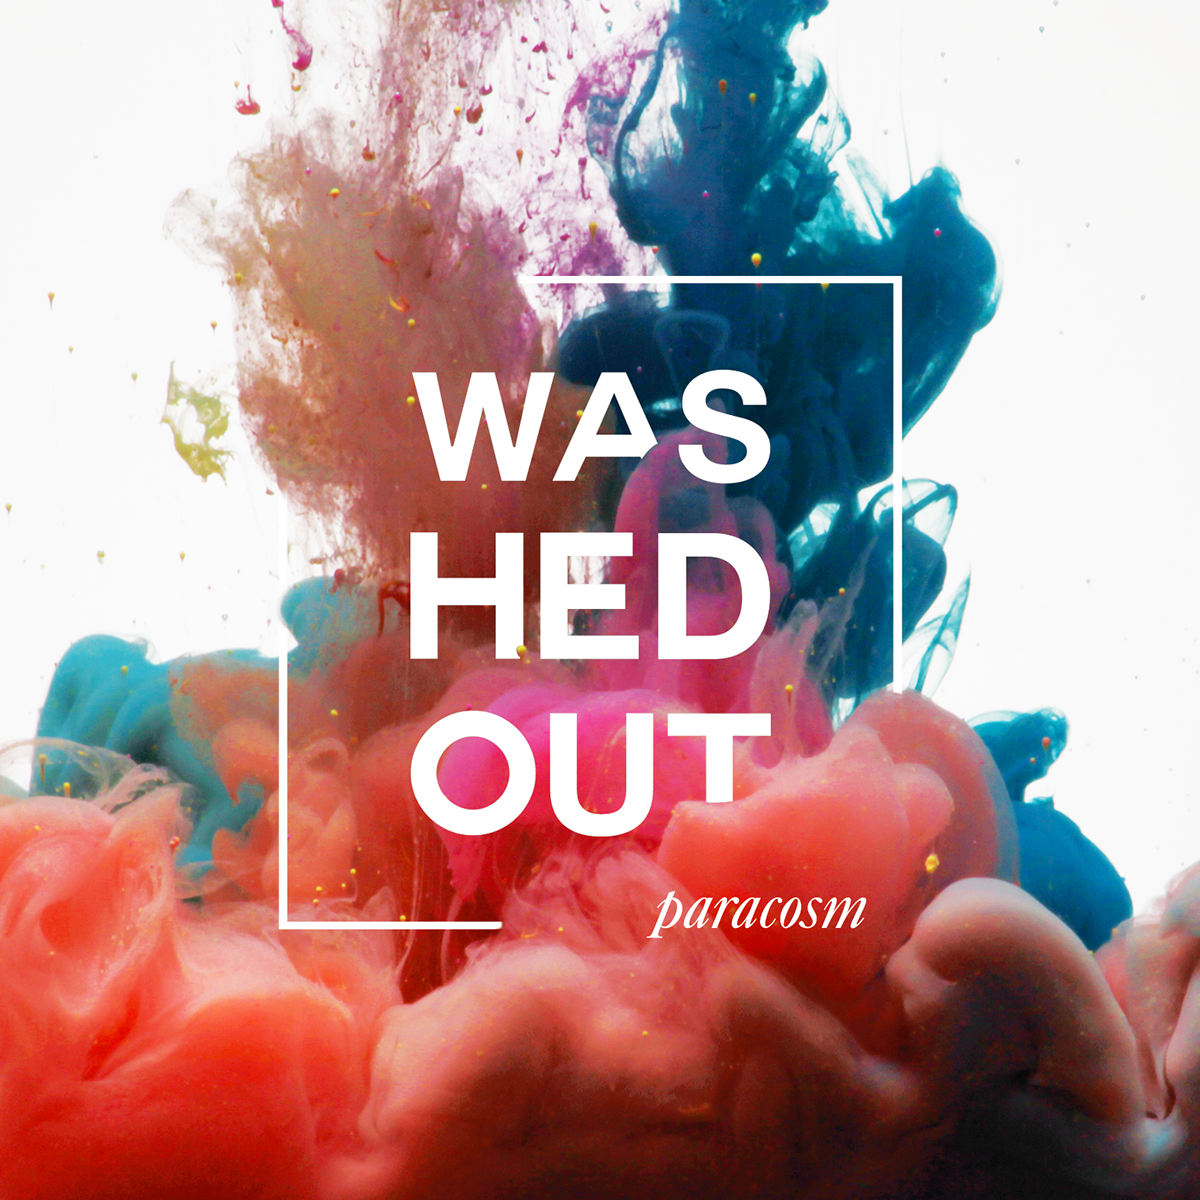 Washed Out CD cover water Acrylic paint cover album Music cover